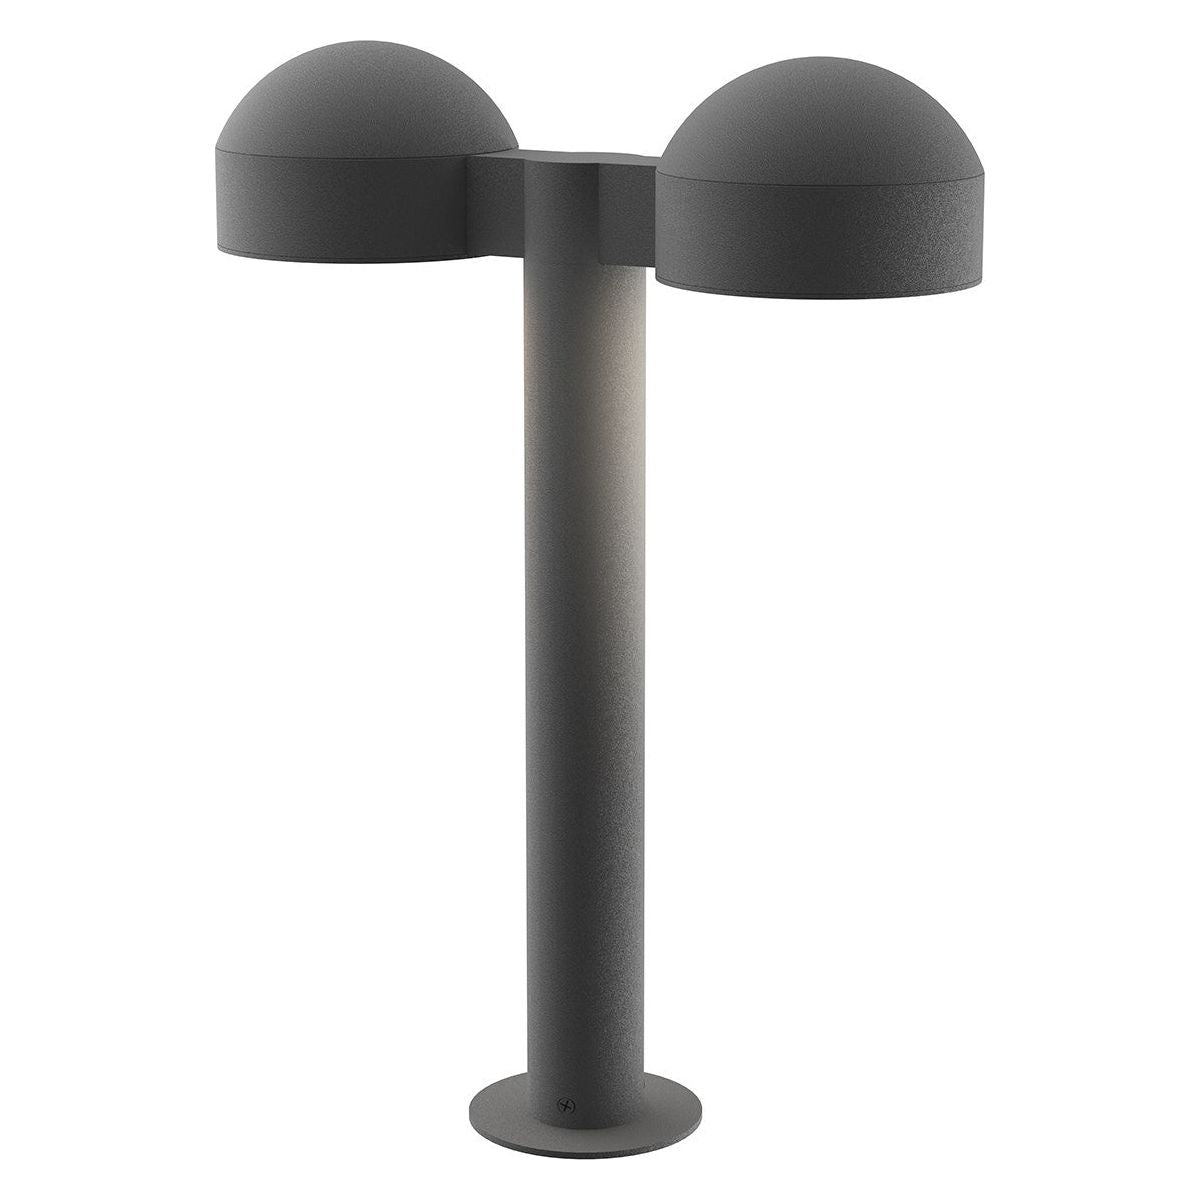 REALS 16" LED Double Bollard with Dome Cap and Plate Lens